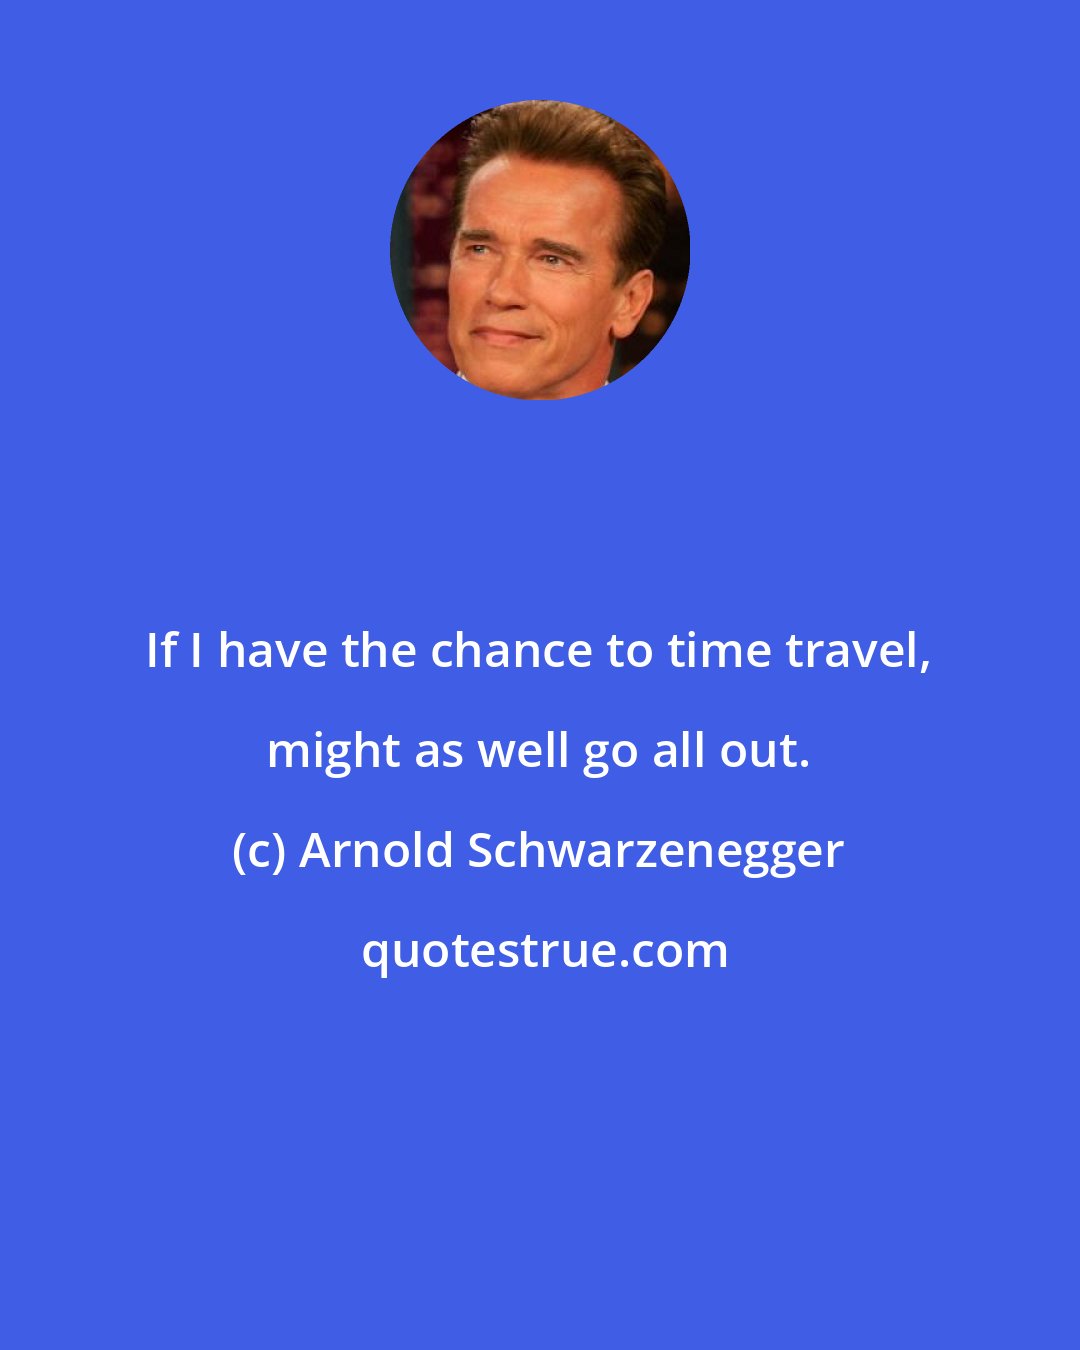 Arnold Schwarzenegger: If I have the chance to time travel, might as well go all out.